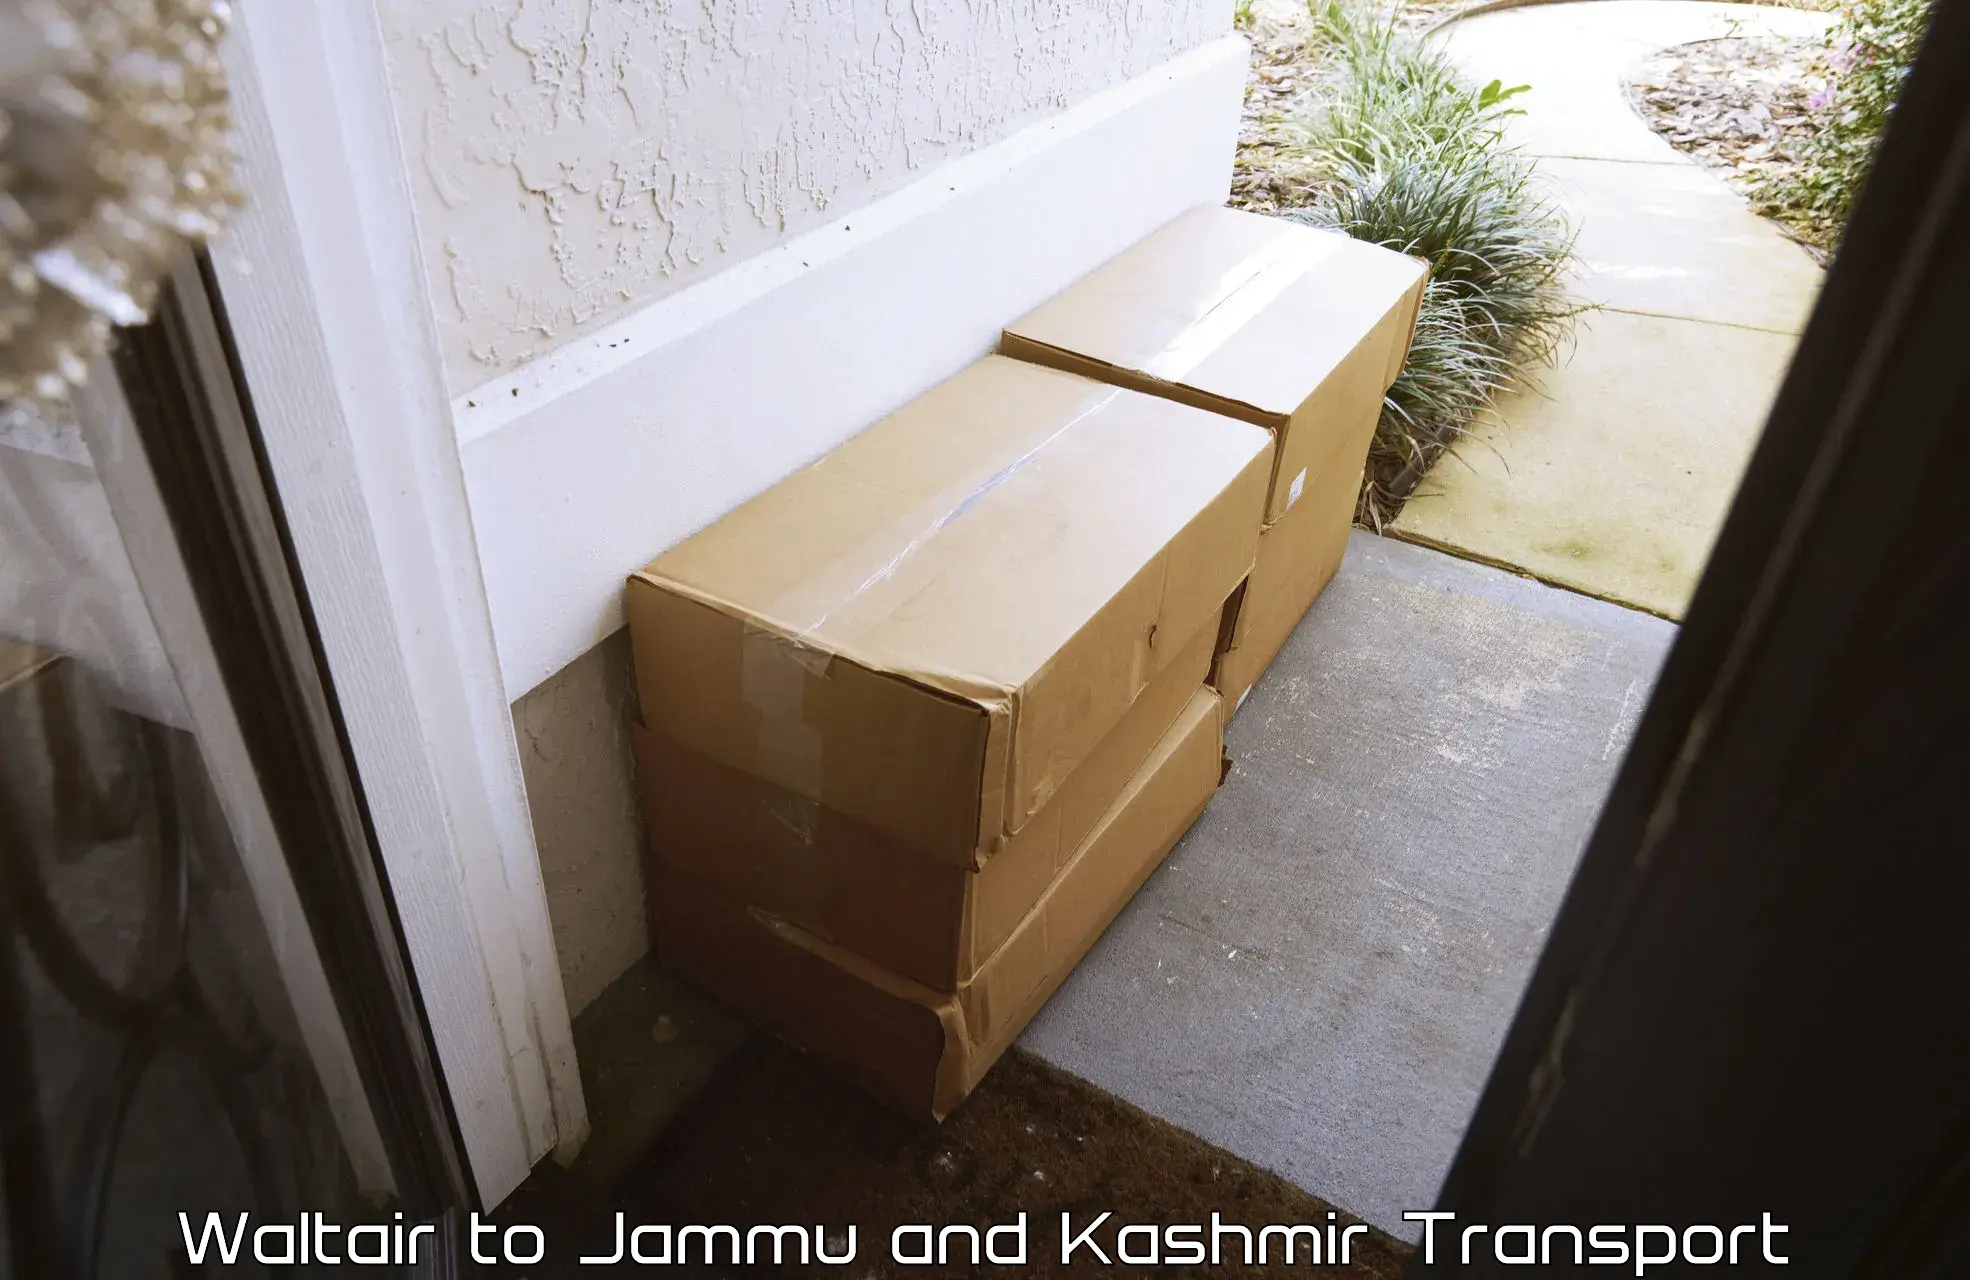 Bike transport service in Waltair to Jammu and Kashmir